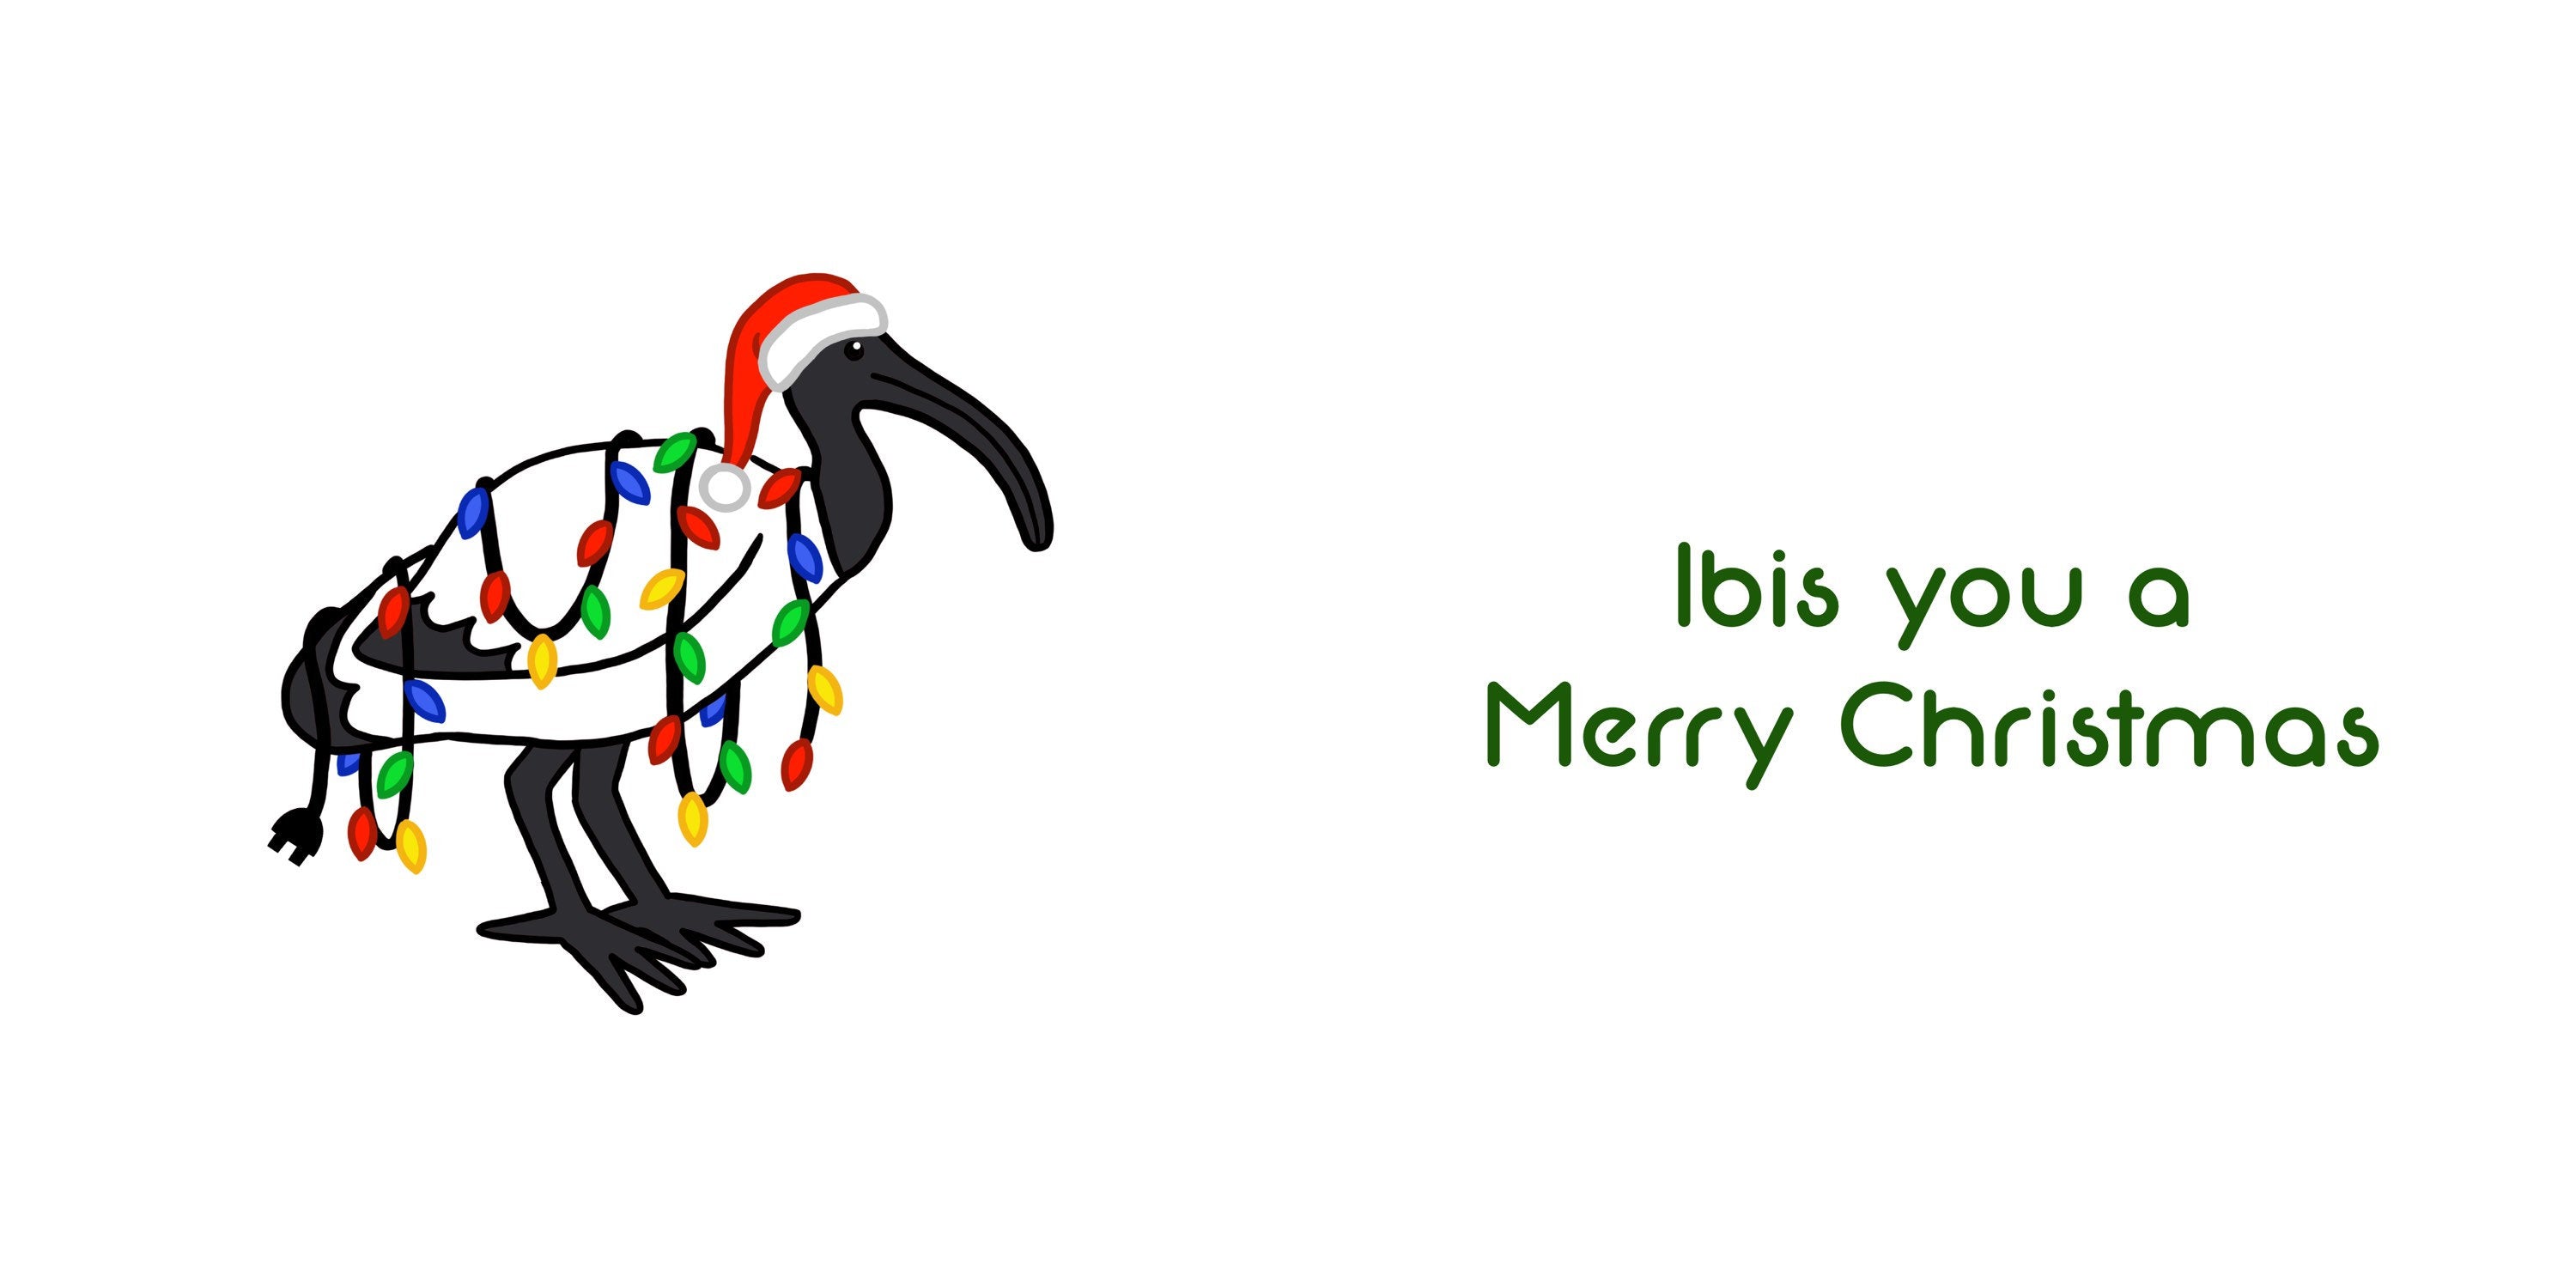 Christmas Ibis Card - festive Australian bird - Three text options - Merry Christmas, Happy New Year, Happy Holidays - envelope included